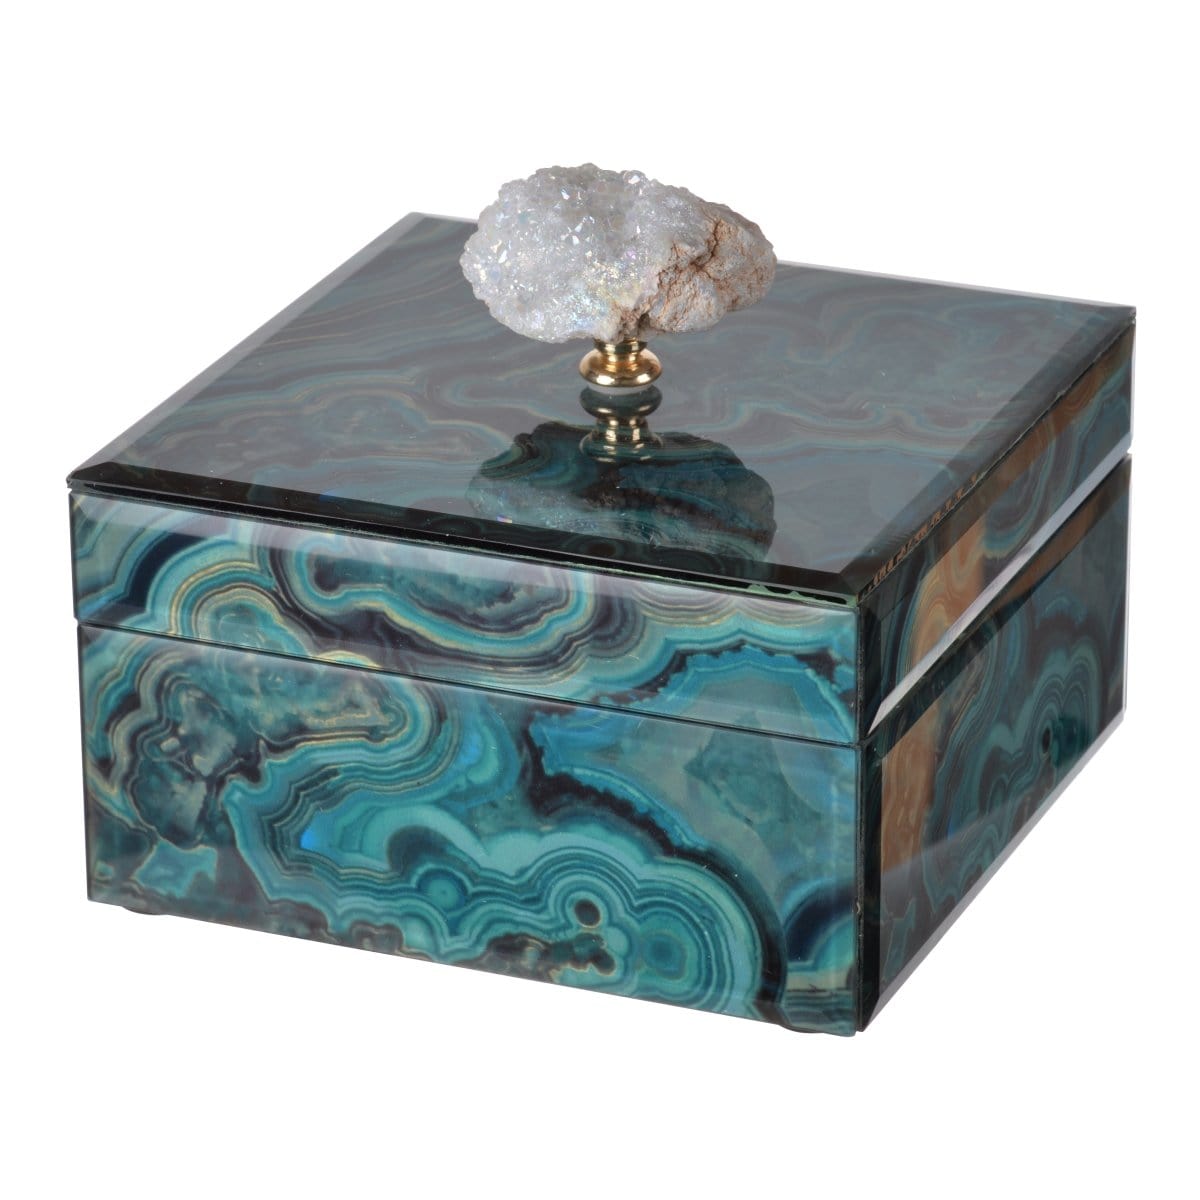 AB-41388 BETHANY MARBLED BOX, SMALL picket and rail